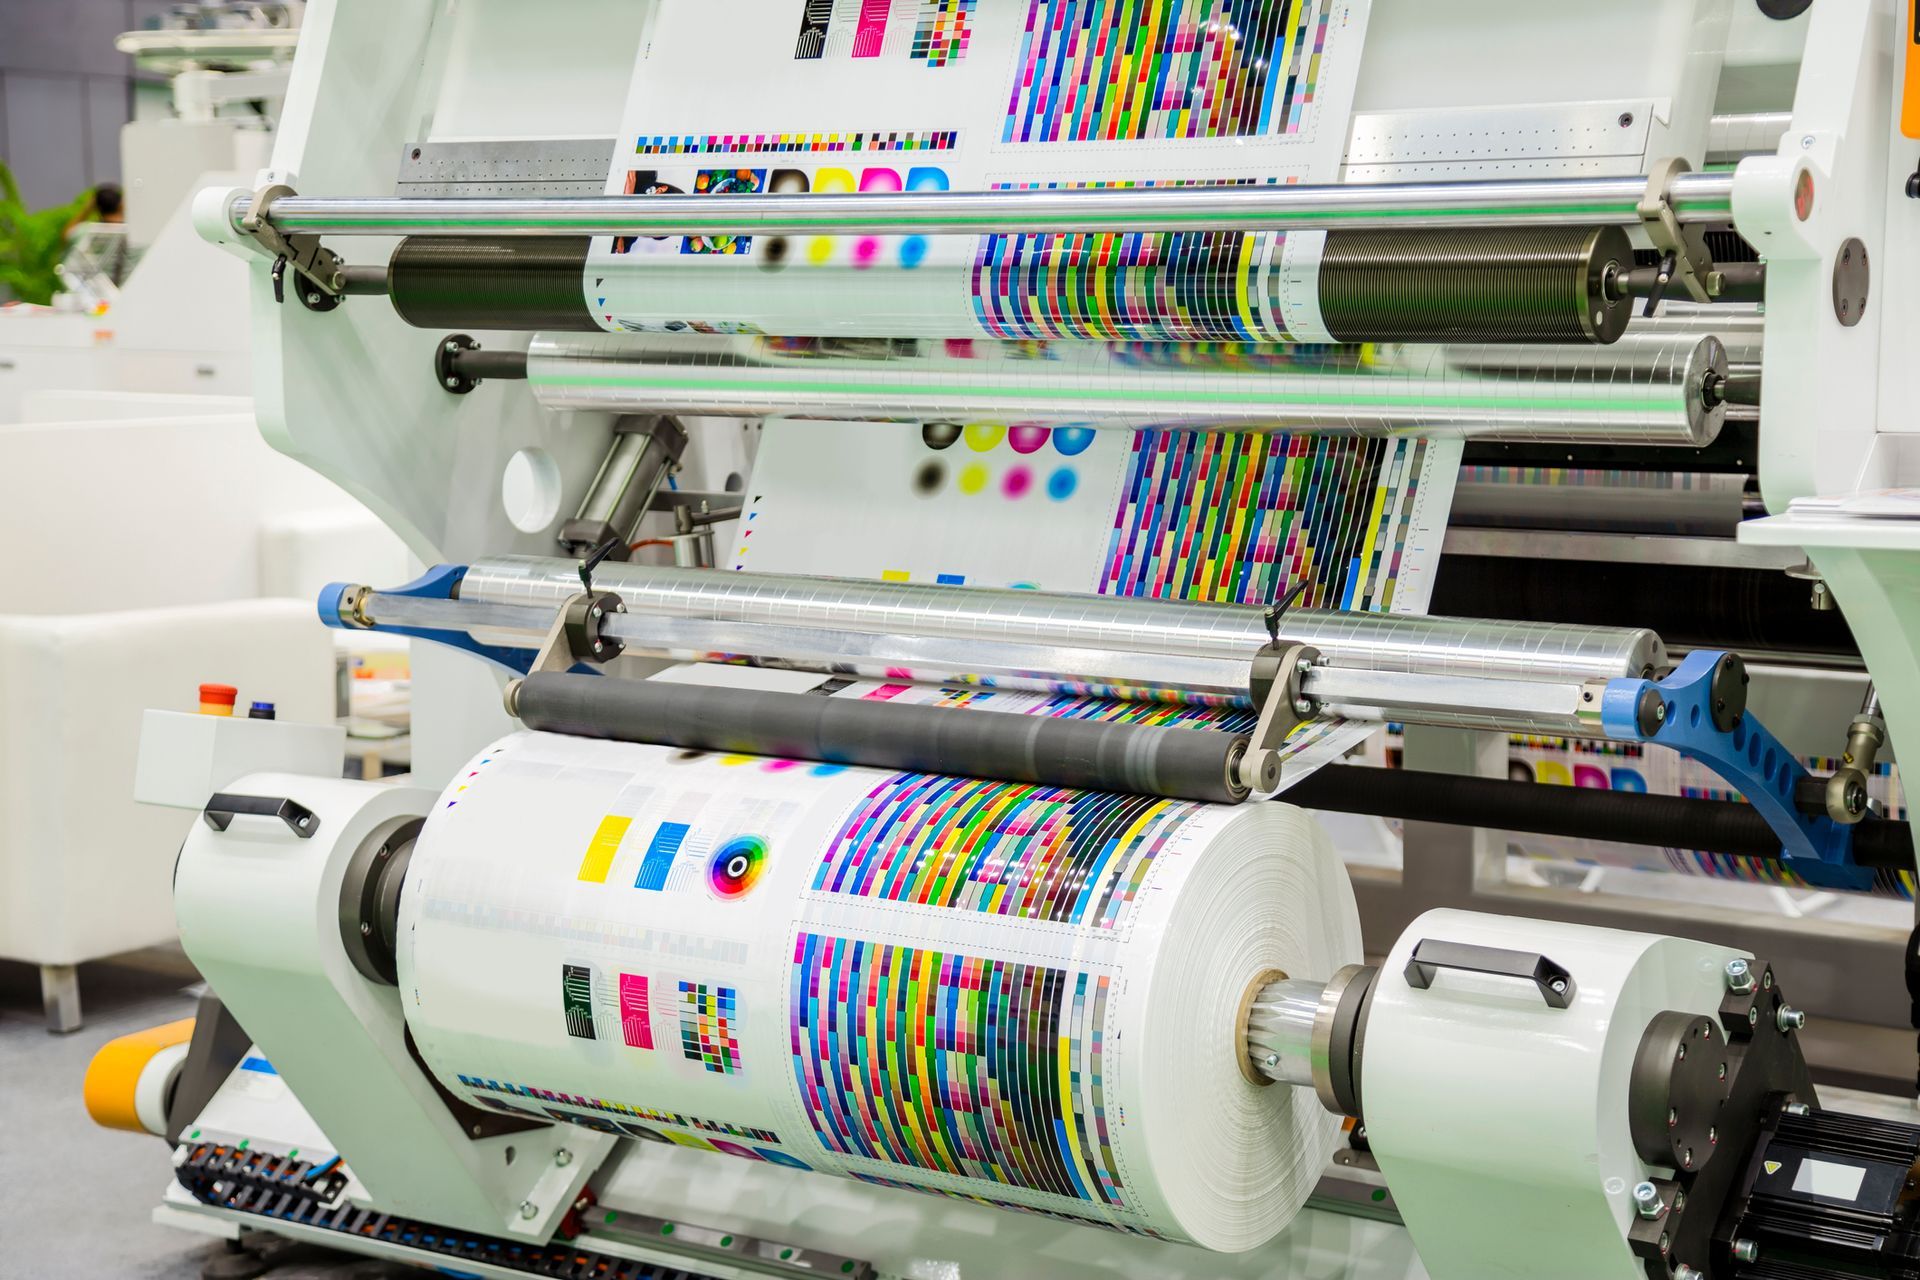 Best Digital Printing For Business in Chatsworth, CA